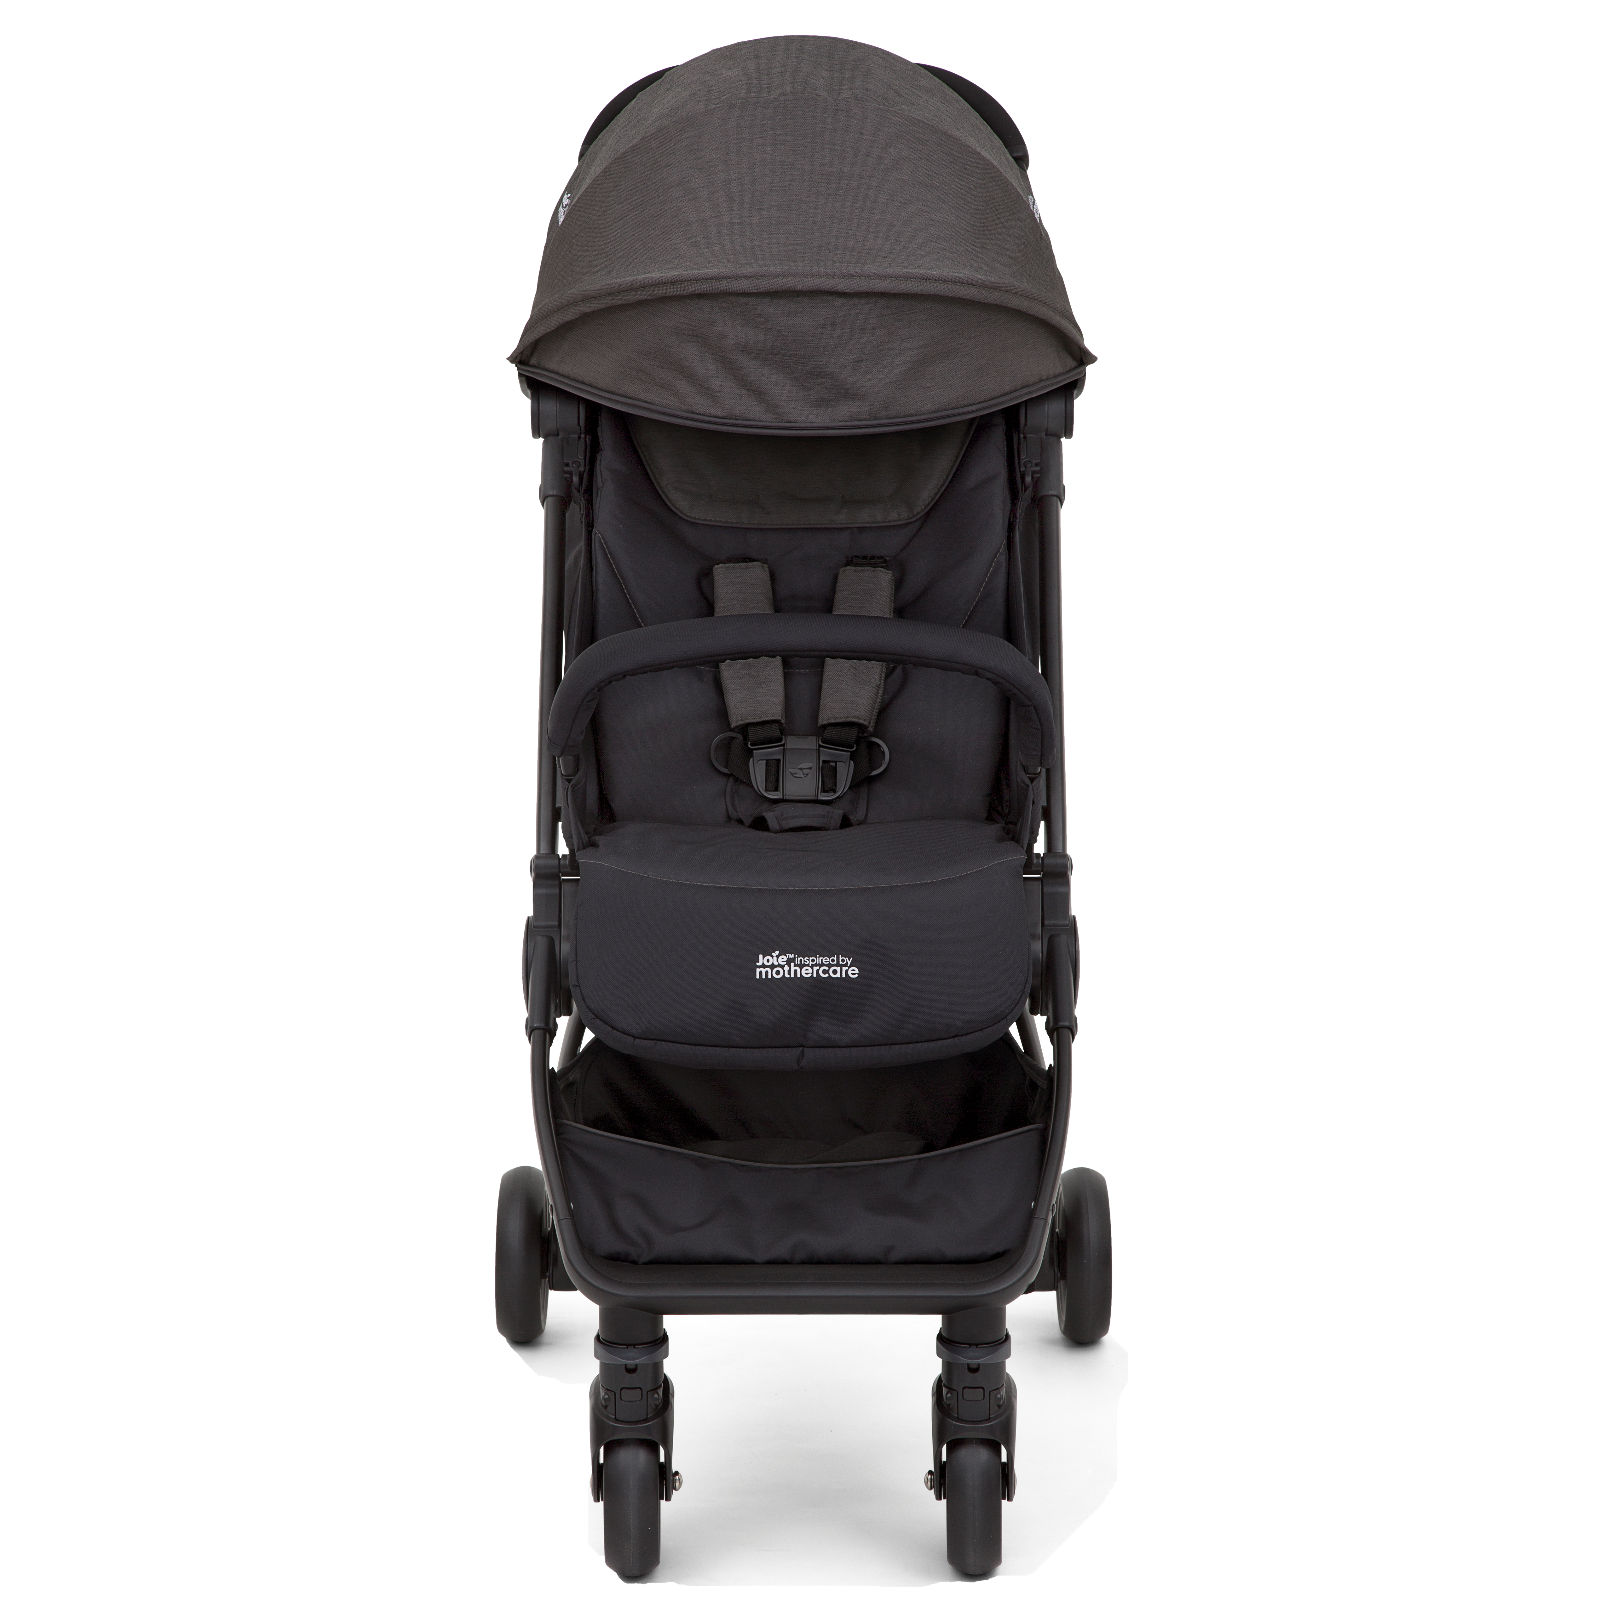 mothercare stroller joie